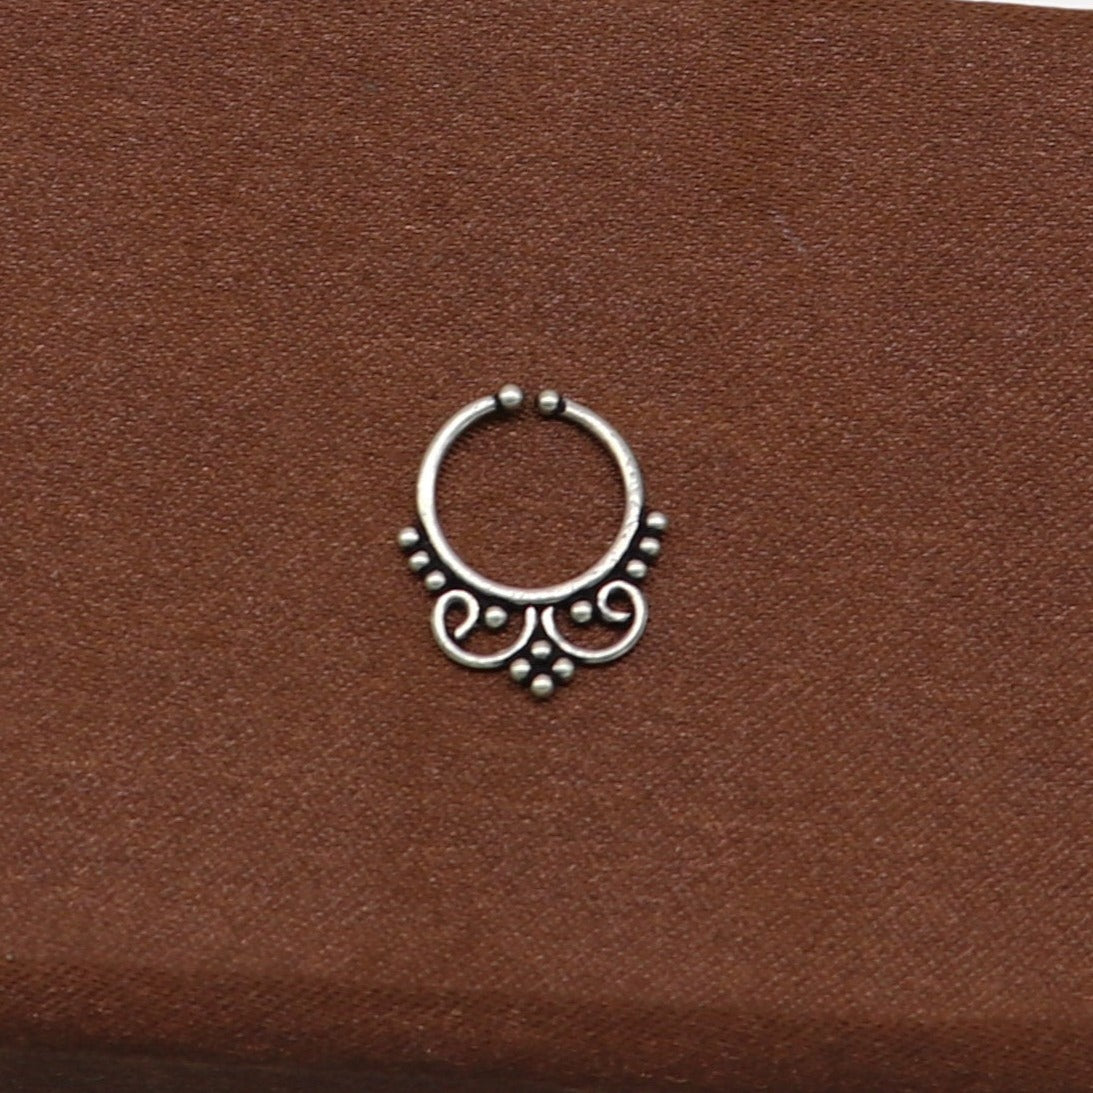 Amazon.com: Indian Nose Ring, 18K Gold Plated Unique Nose Hoop Piercing,  Leaf Shaped, 20g, Handmade Jewelry : Handmade Products